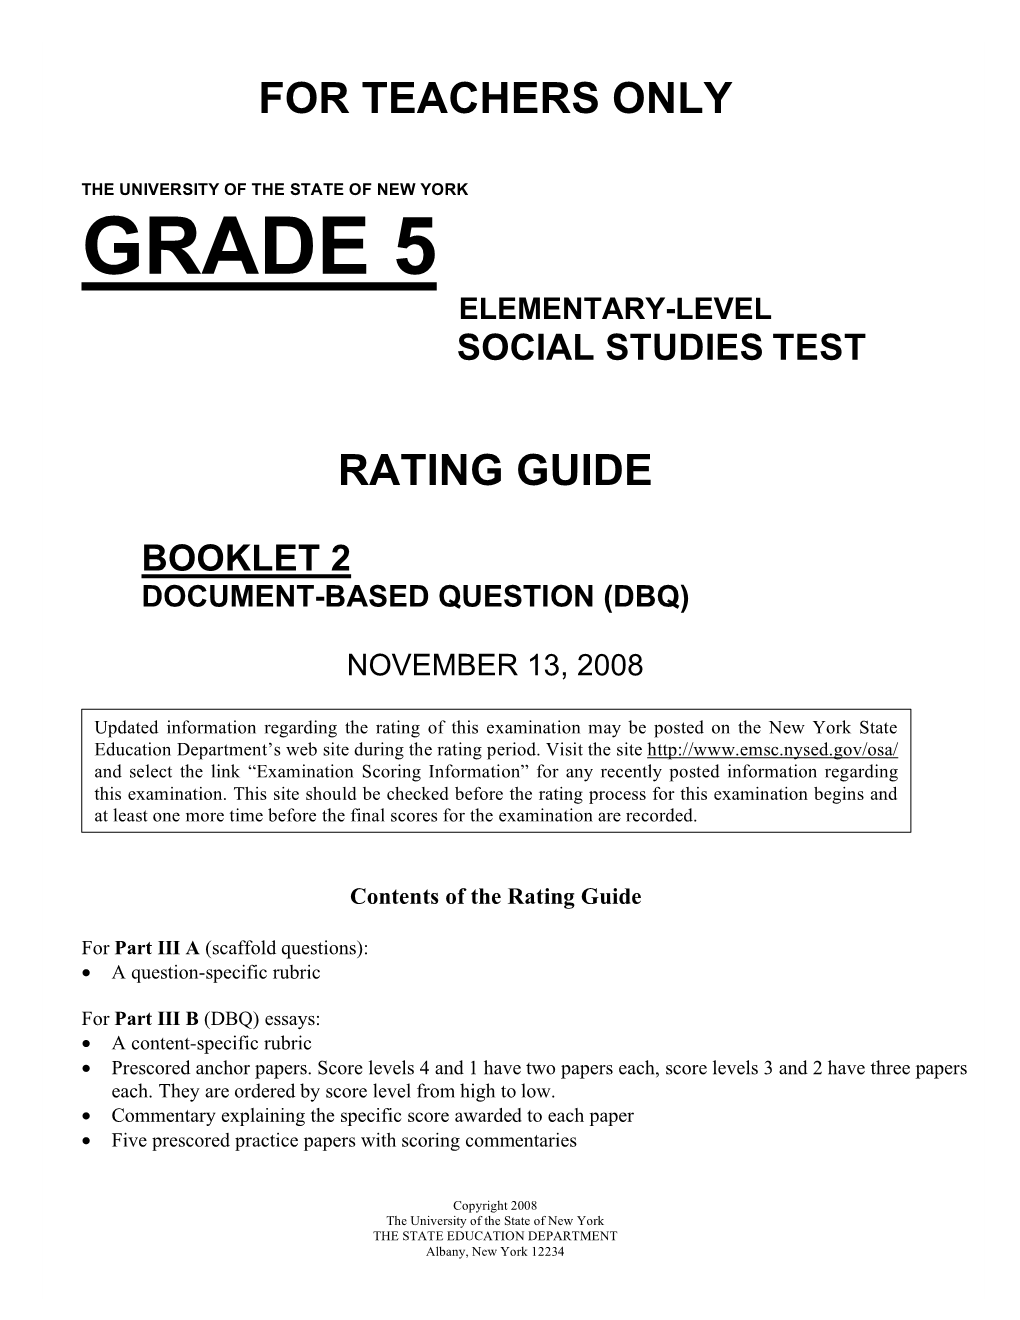 Rating Guide 2